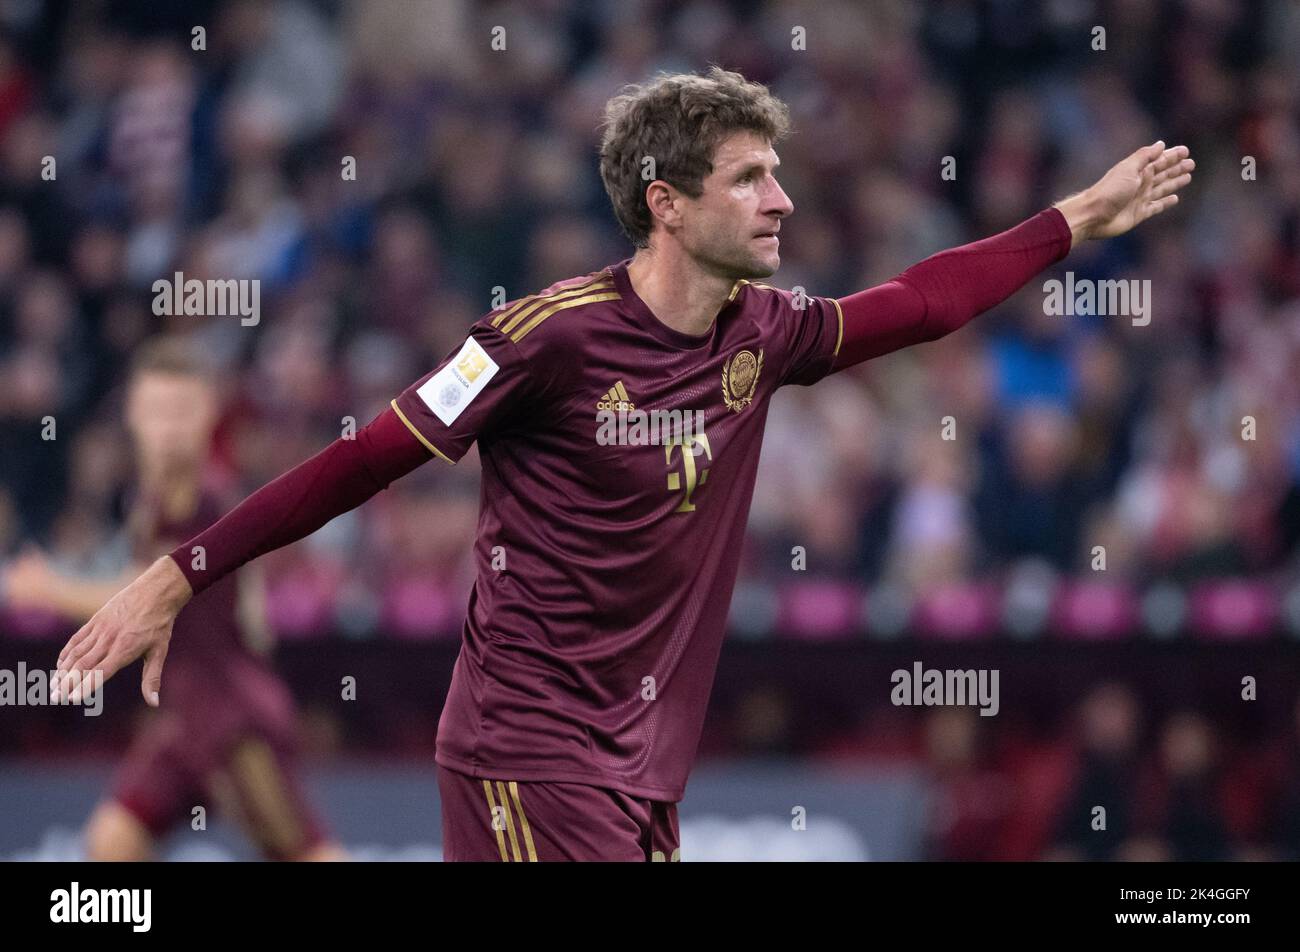 Munich, Germany. 30th Sep, 2022. Soccer: Bundesliga, Bayern Munich - Bayer Leverkusen, Matchday 8 at Allianz Arena. Thomas Müller of Munich gestures on the pitch. Credit: Sven Hoppe/dpa - IMPORTANT NOTE: In accordance with the requirements of the DFL Deutsche Fußball Liga and the DFB Deutscher Fußball-Bund, it is prohibited to use or have used photographs taken in the stadium and/or of the match in the form of sequence pictures and/or video-like photo series./dpa/Alamy Live News Stock Photo